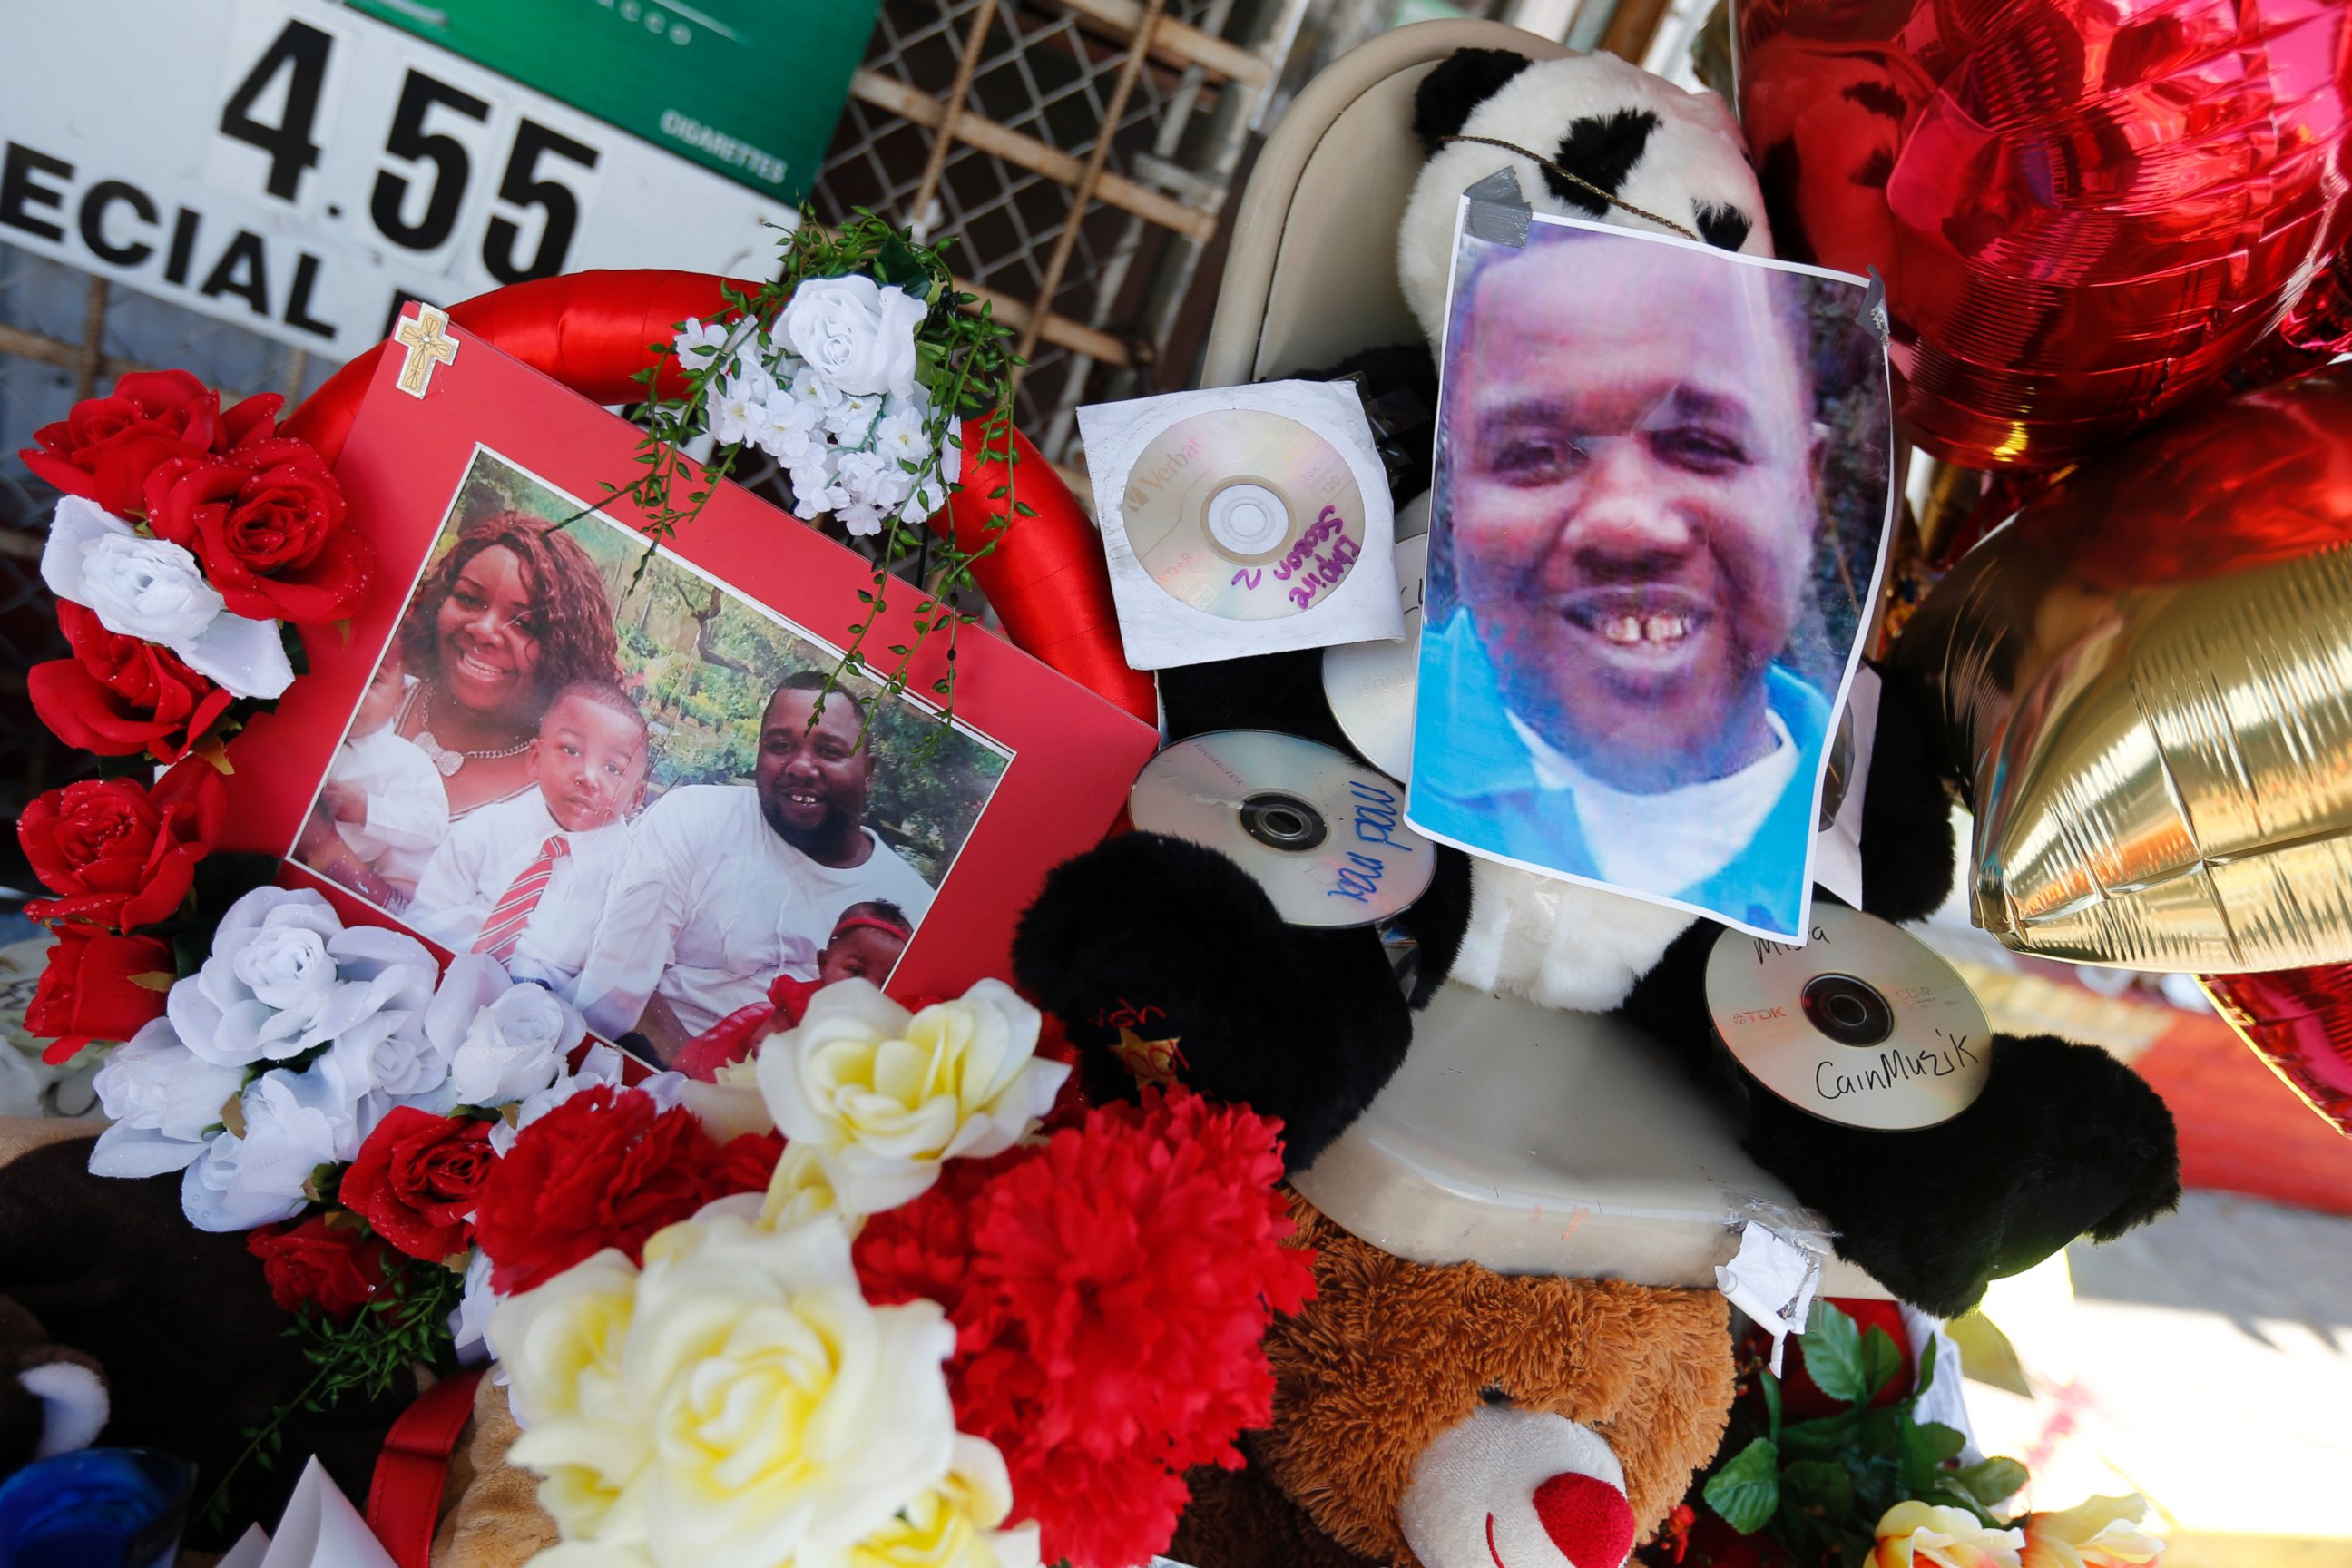 PHOTO: Photos of Alton Sterling are interspersed with flowers and mementos at a makeshift memorial in front of the Triple S Food Mart in Baton Rouge, Louisiana, July 7, 2016.